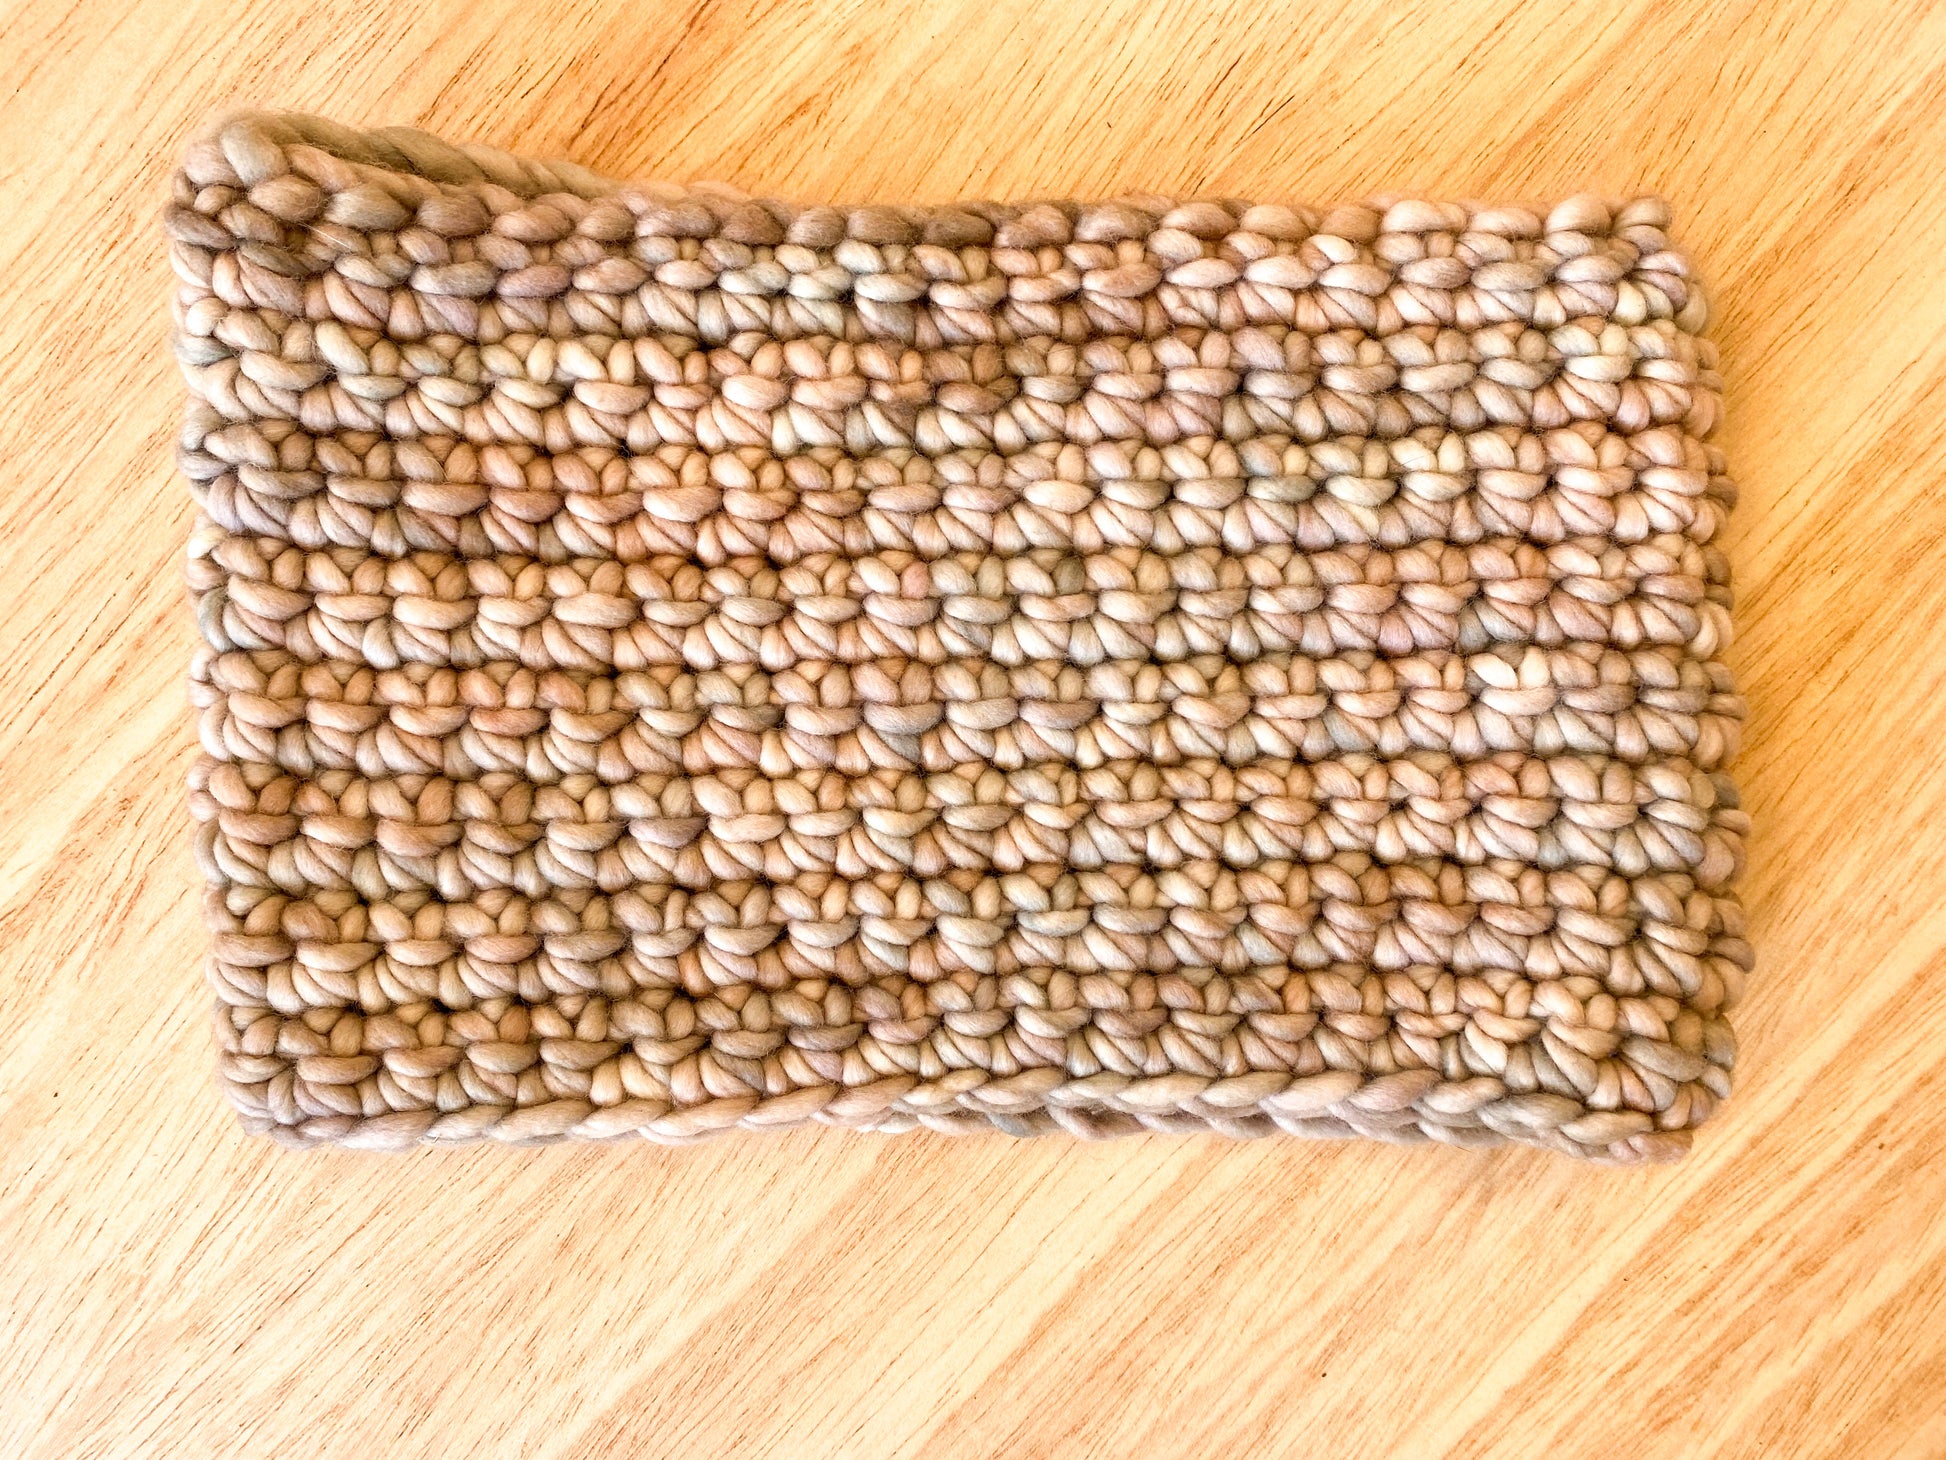 Beginner Crochet Class - Making a Cowl - Materials Included - homesewn